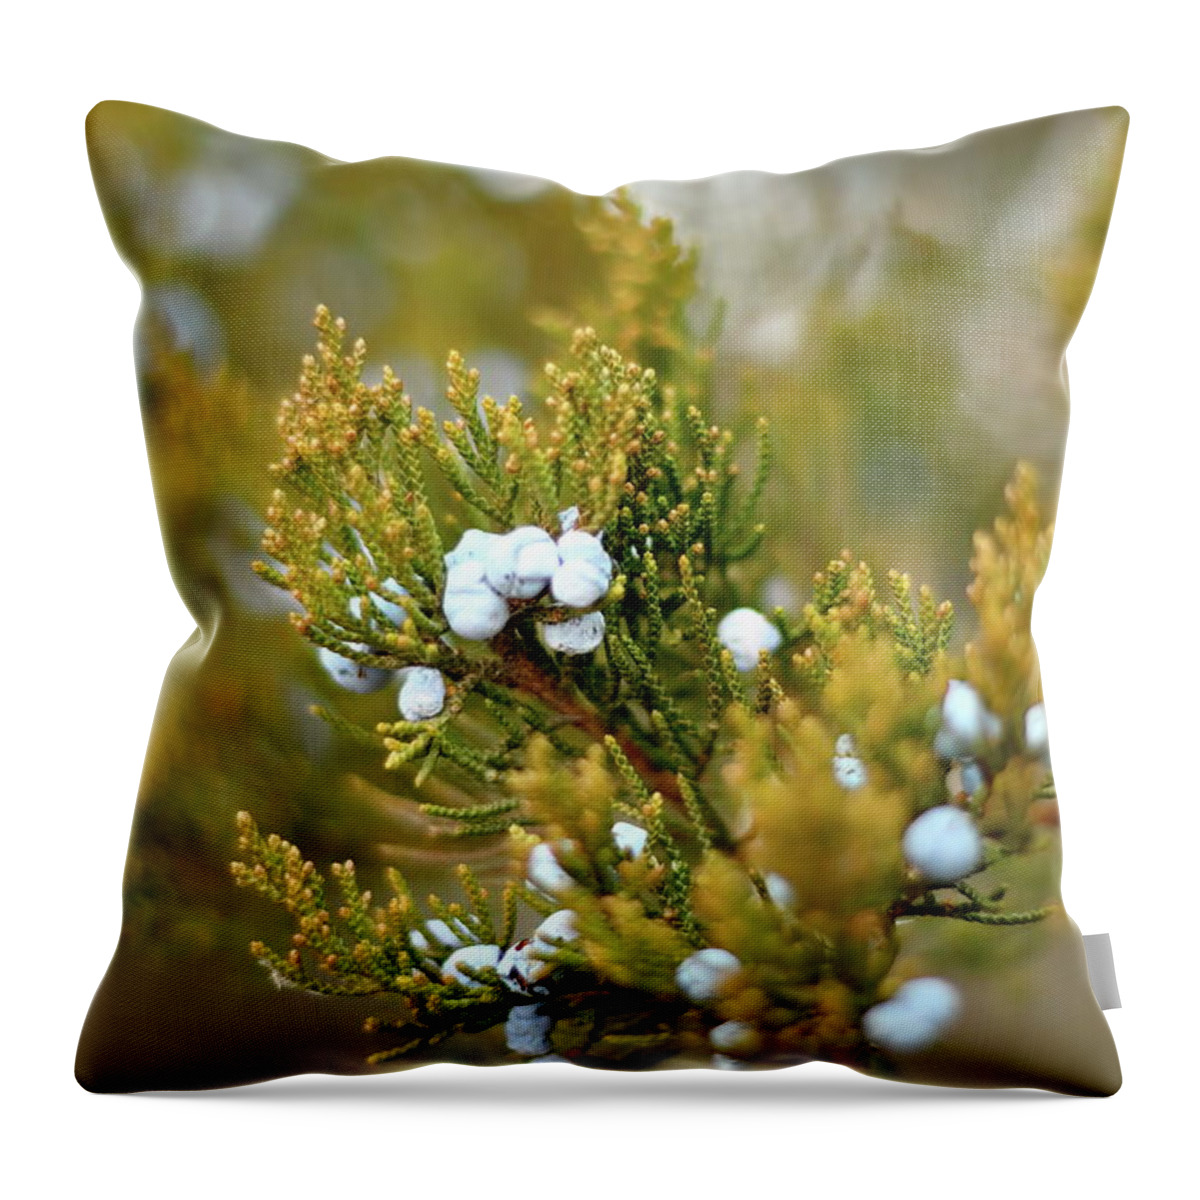 Juniper Throw Pillow featuring the photograph Juniper Berries by Lens Art Photography By Larry Trager